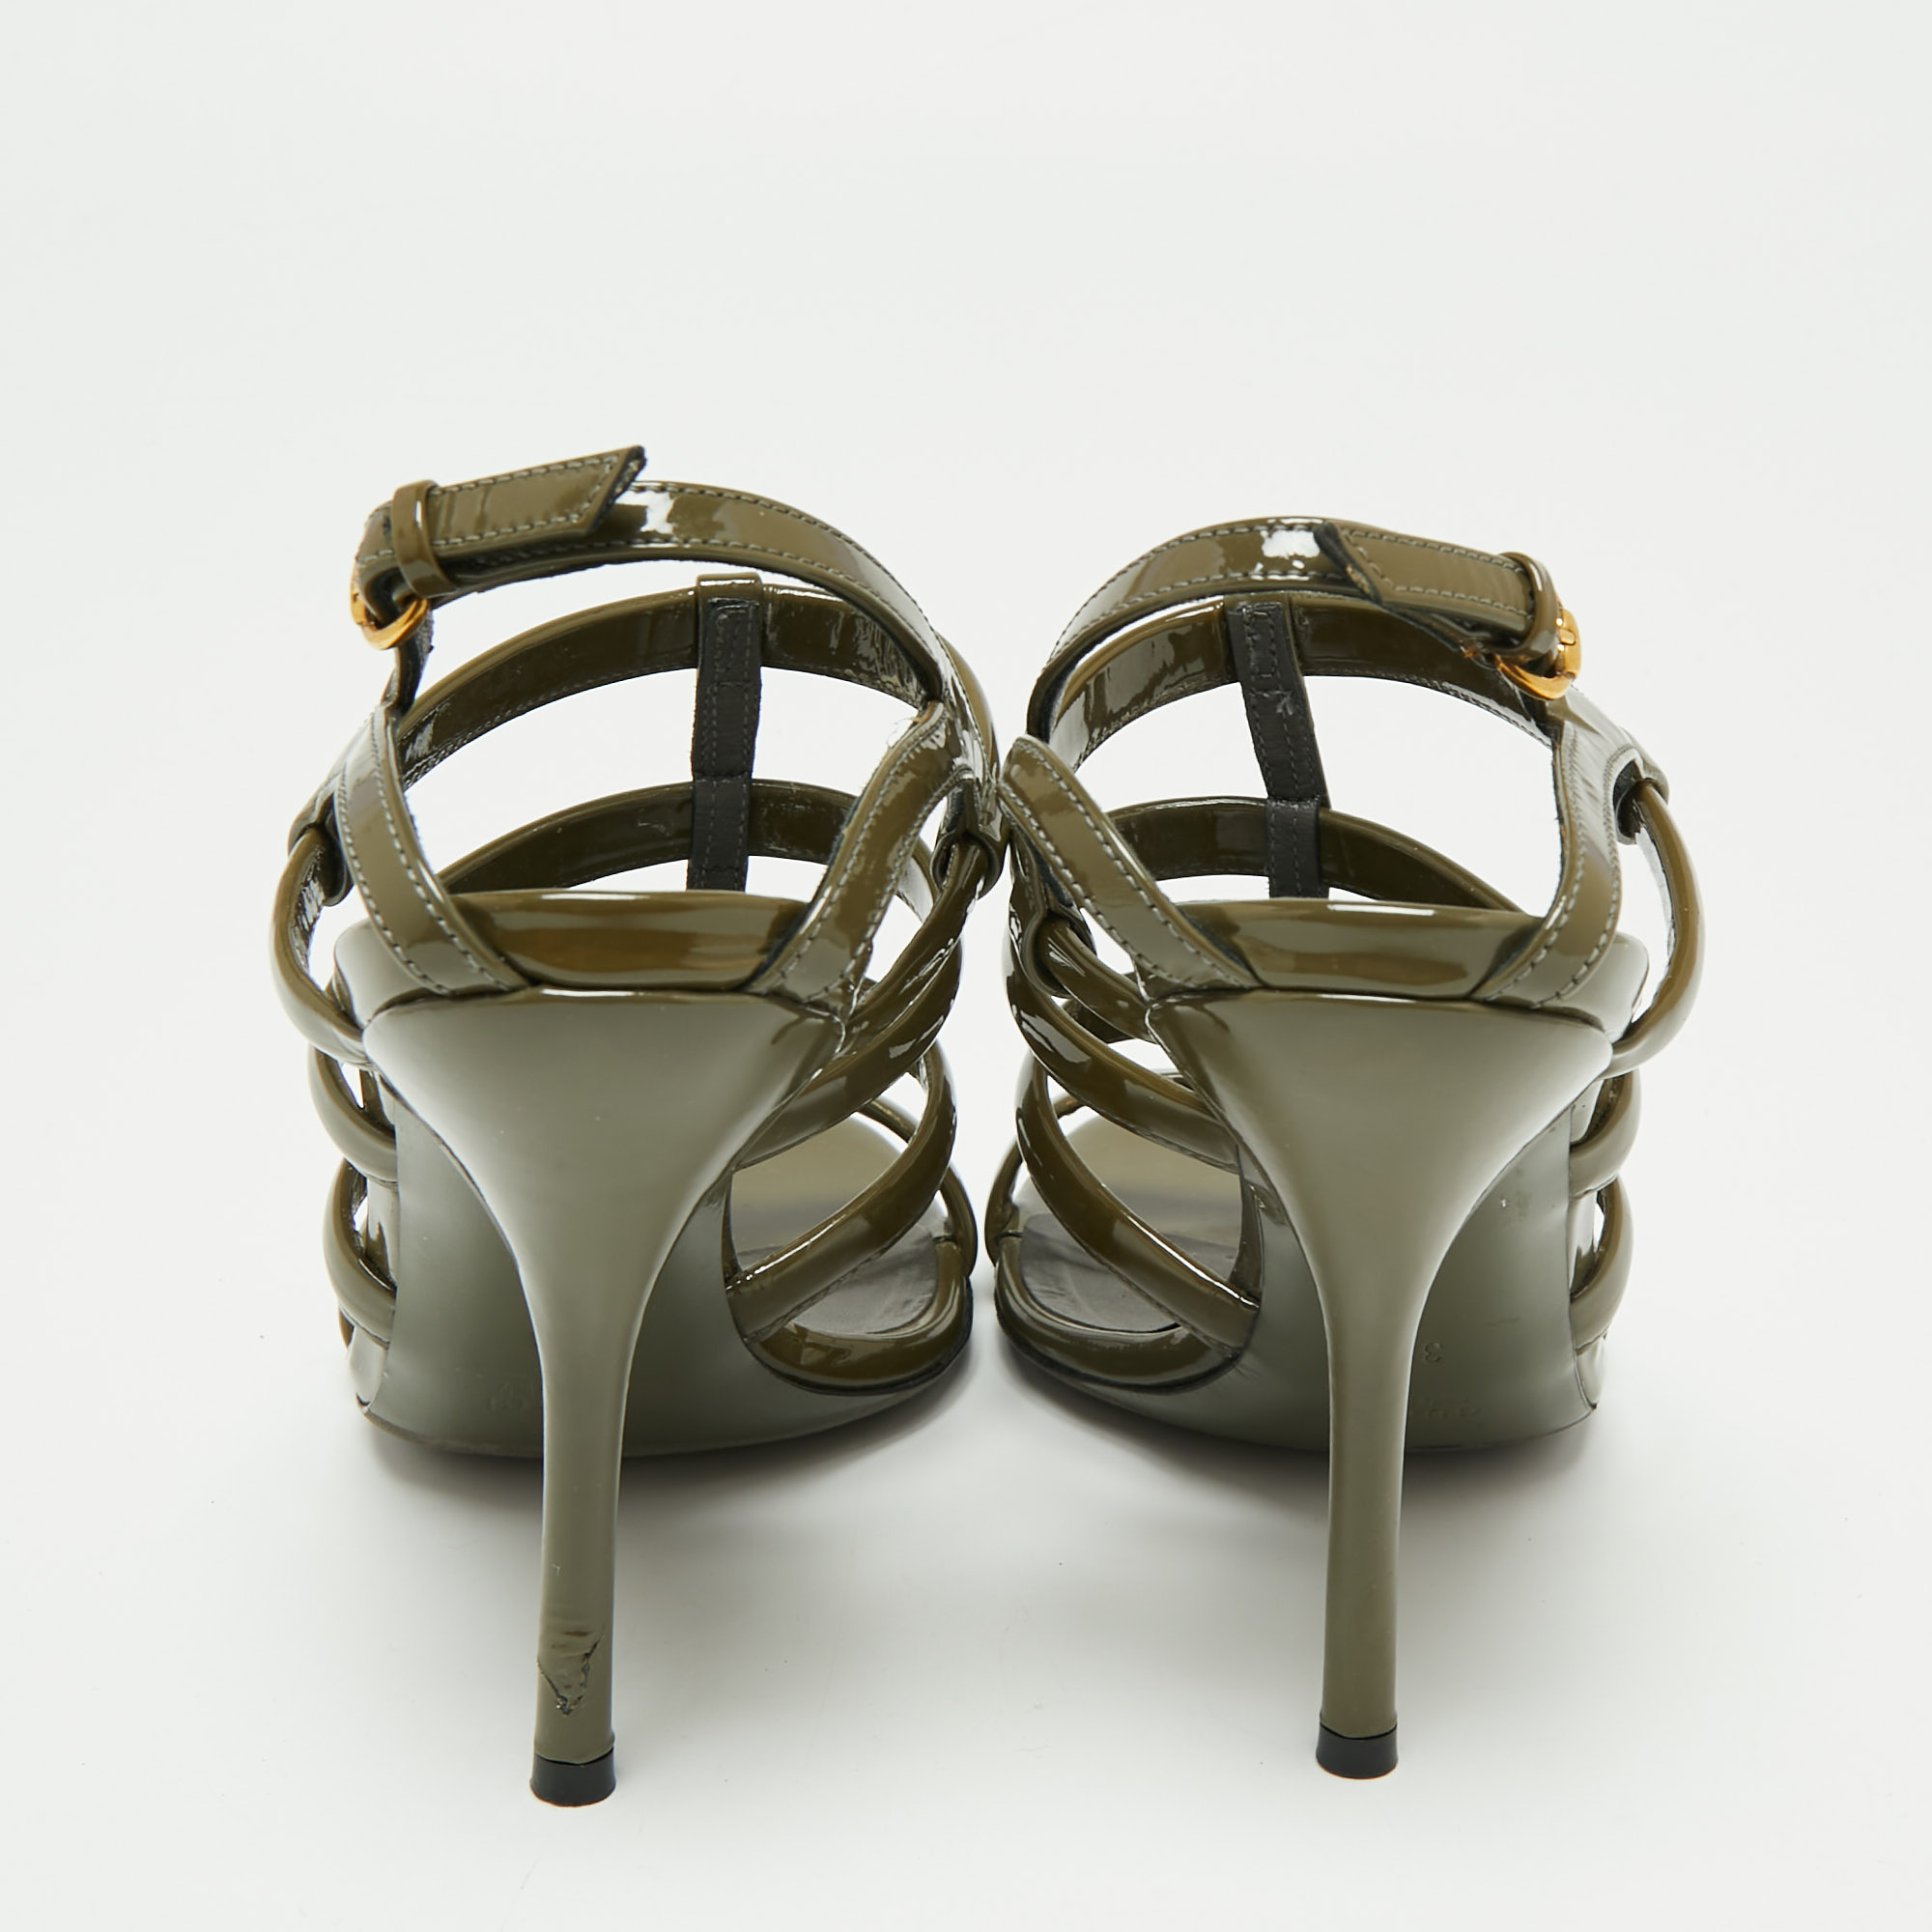 Gucci Olive Green Patent Leather Ankle Strap Gladiator Sandals Size 38